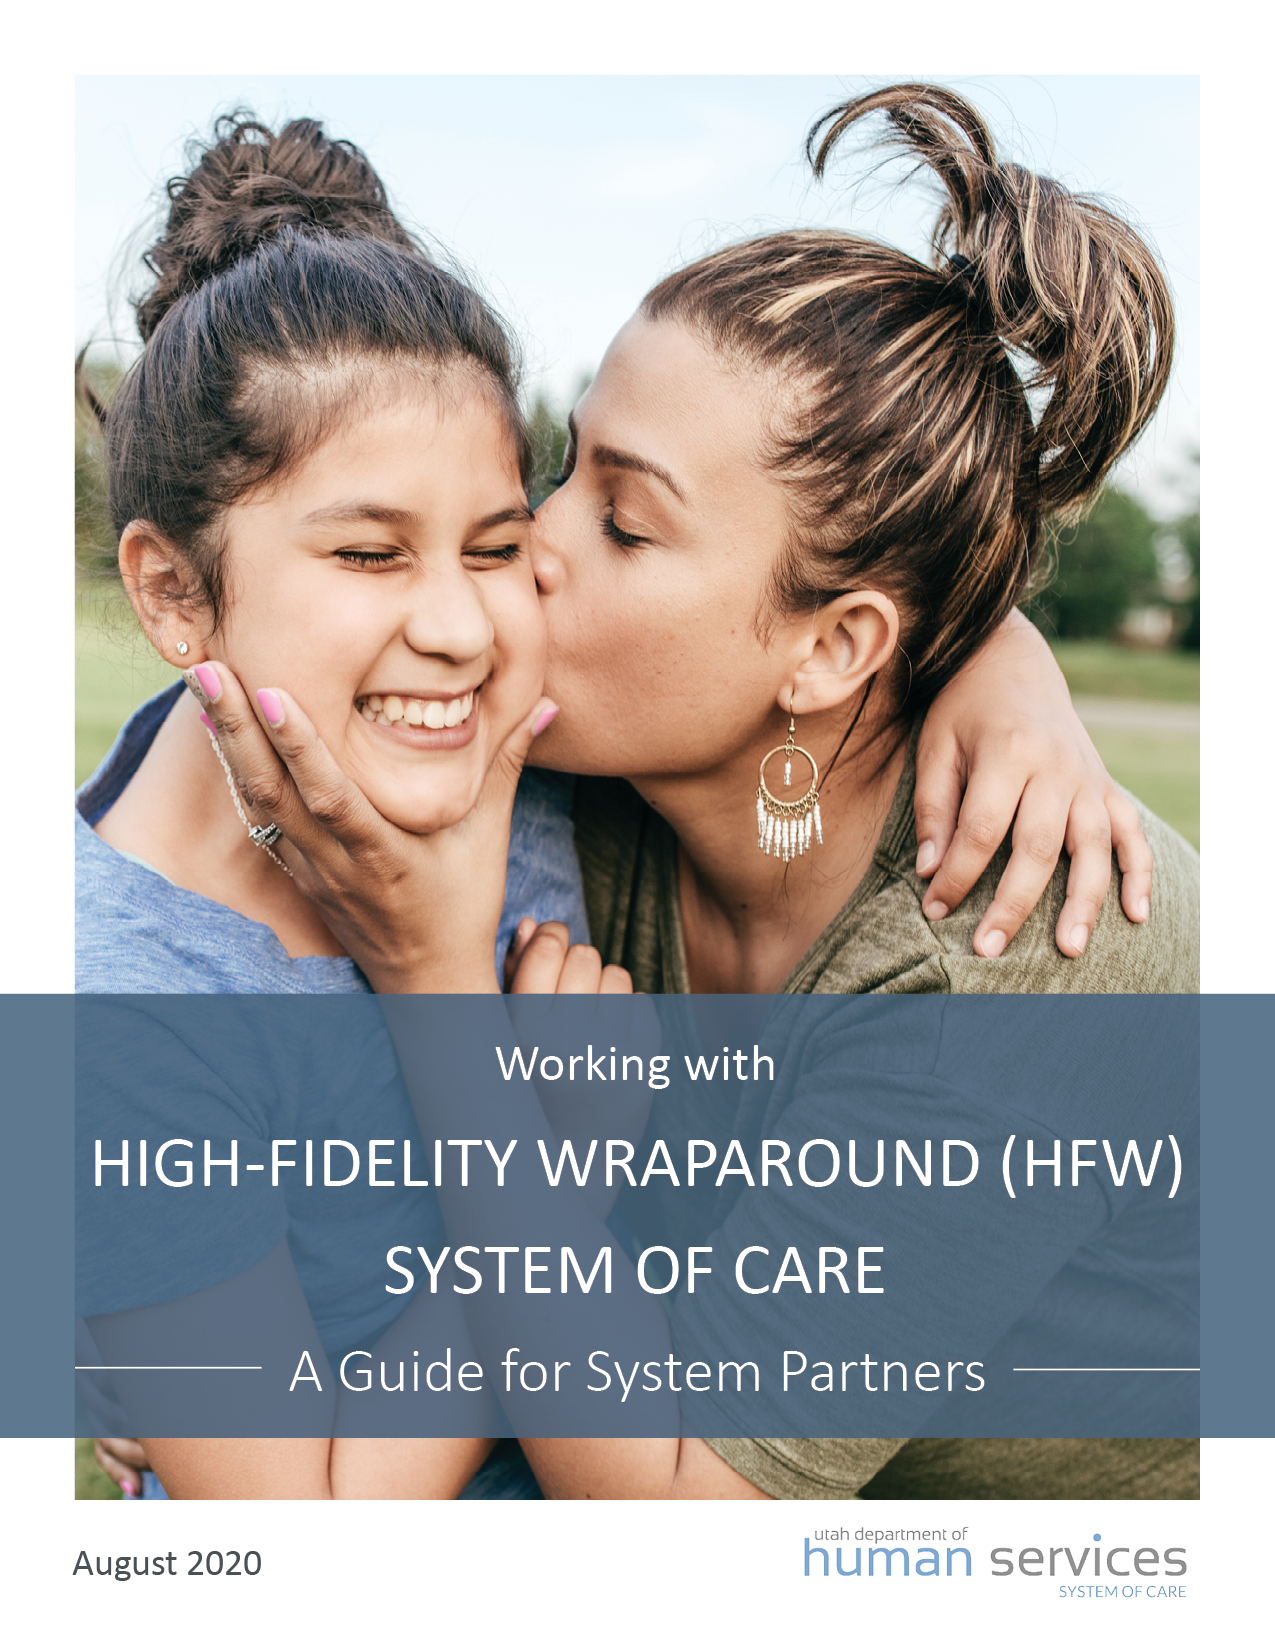 The Cover of the High-Fidelity Wraparound (HFW) System of Care Booklet, featuring a mother giving her daughter a kiss.